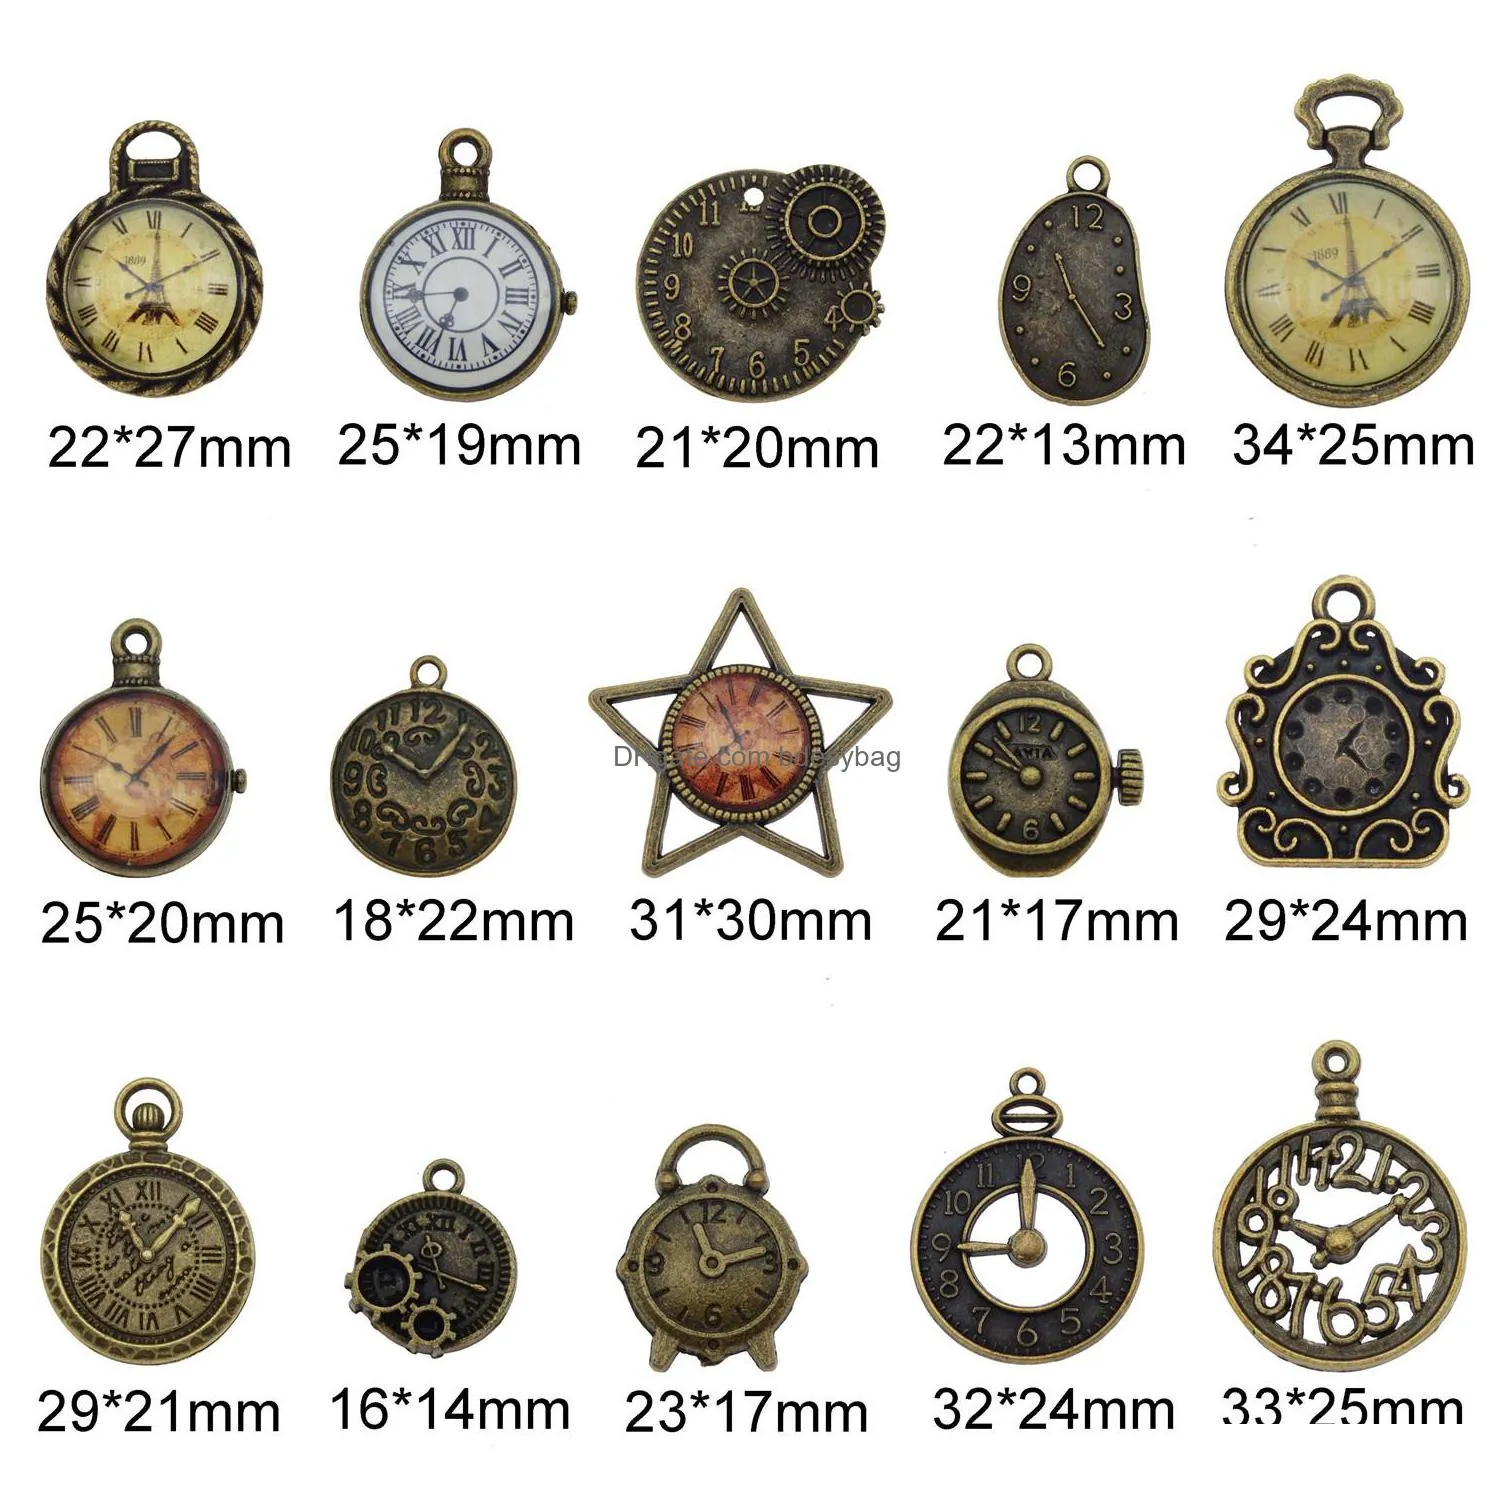 30pcs random mixed clock watch face components charms alloy necklace pendant finding jewelry making steampunk diy accessory